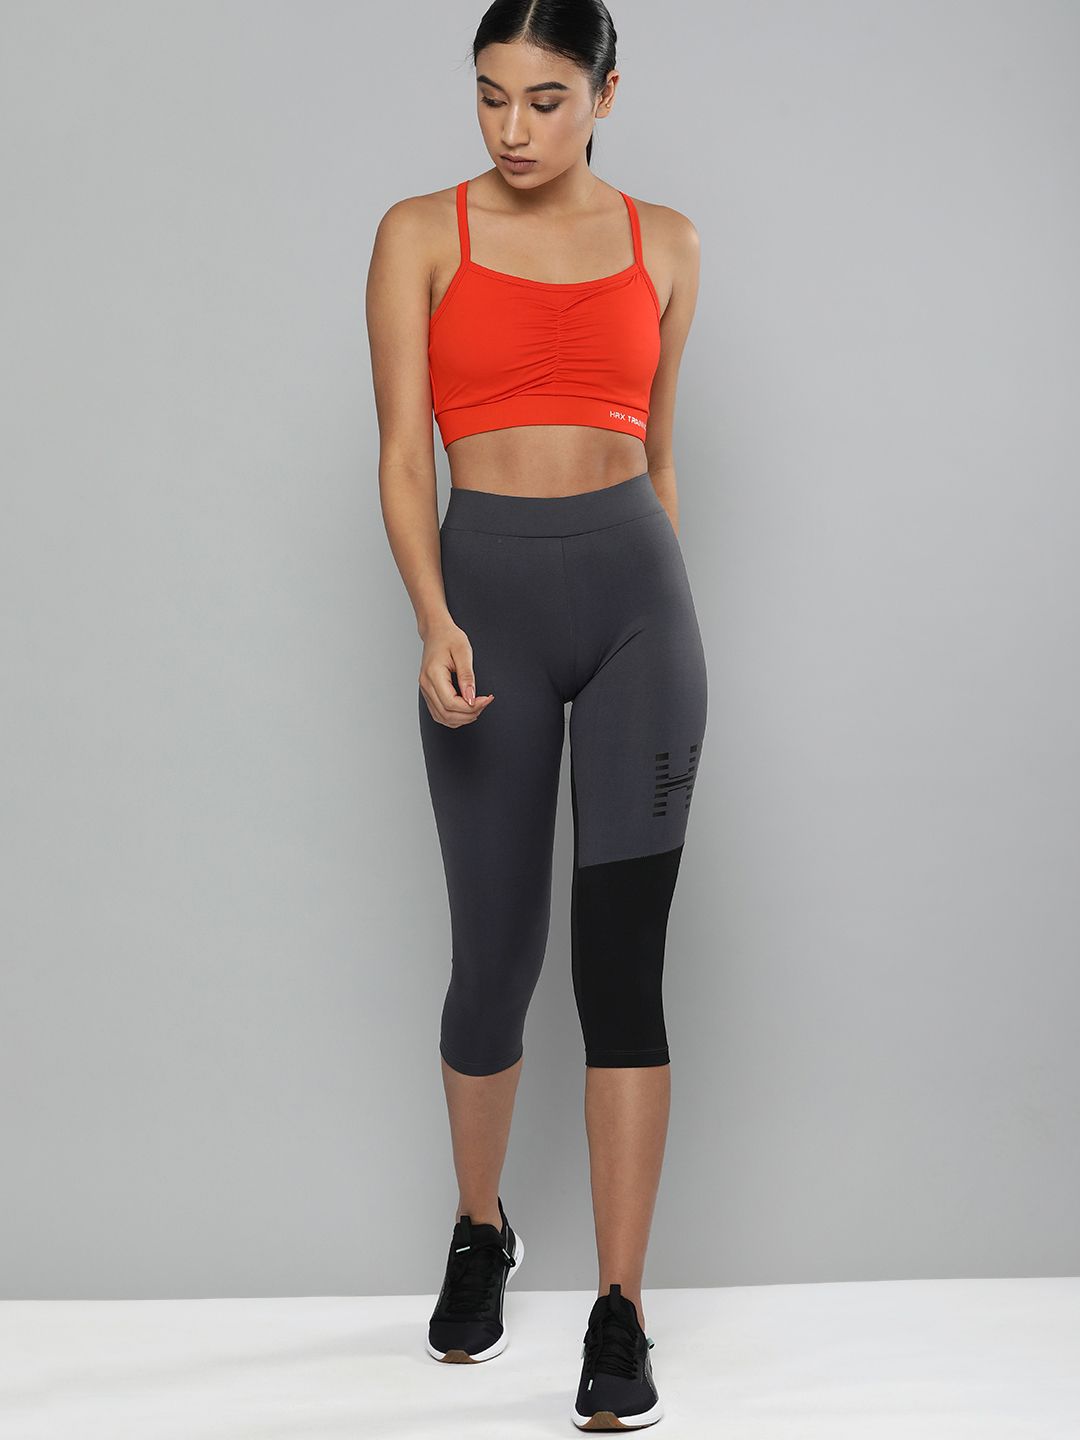 HRX By Hrithik Roshan Women Grey & Black Rapid-Dry Brand Carrier Training Tights Price in India